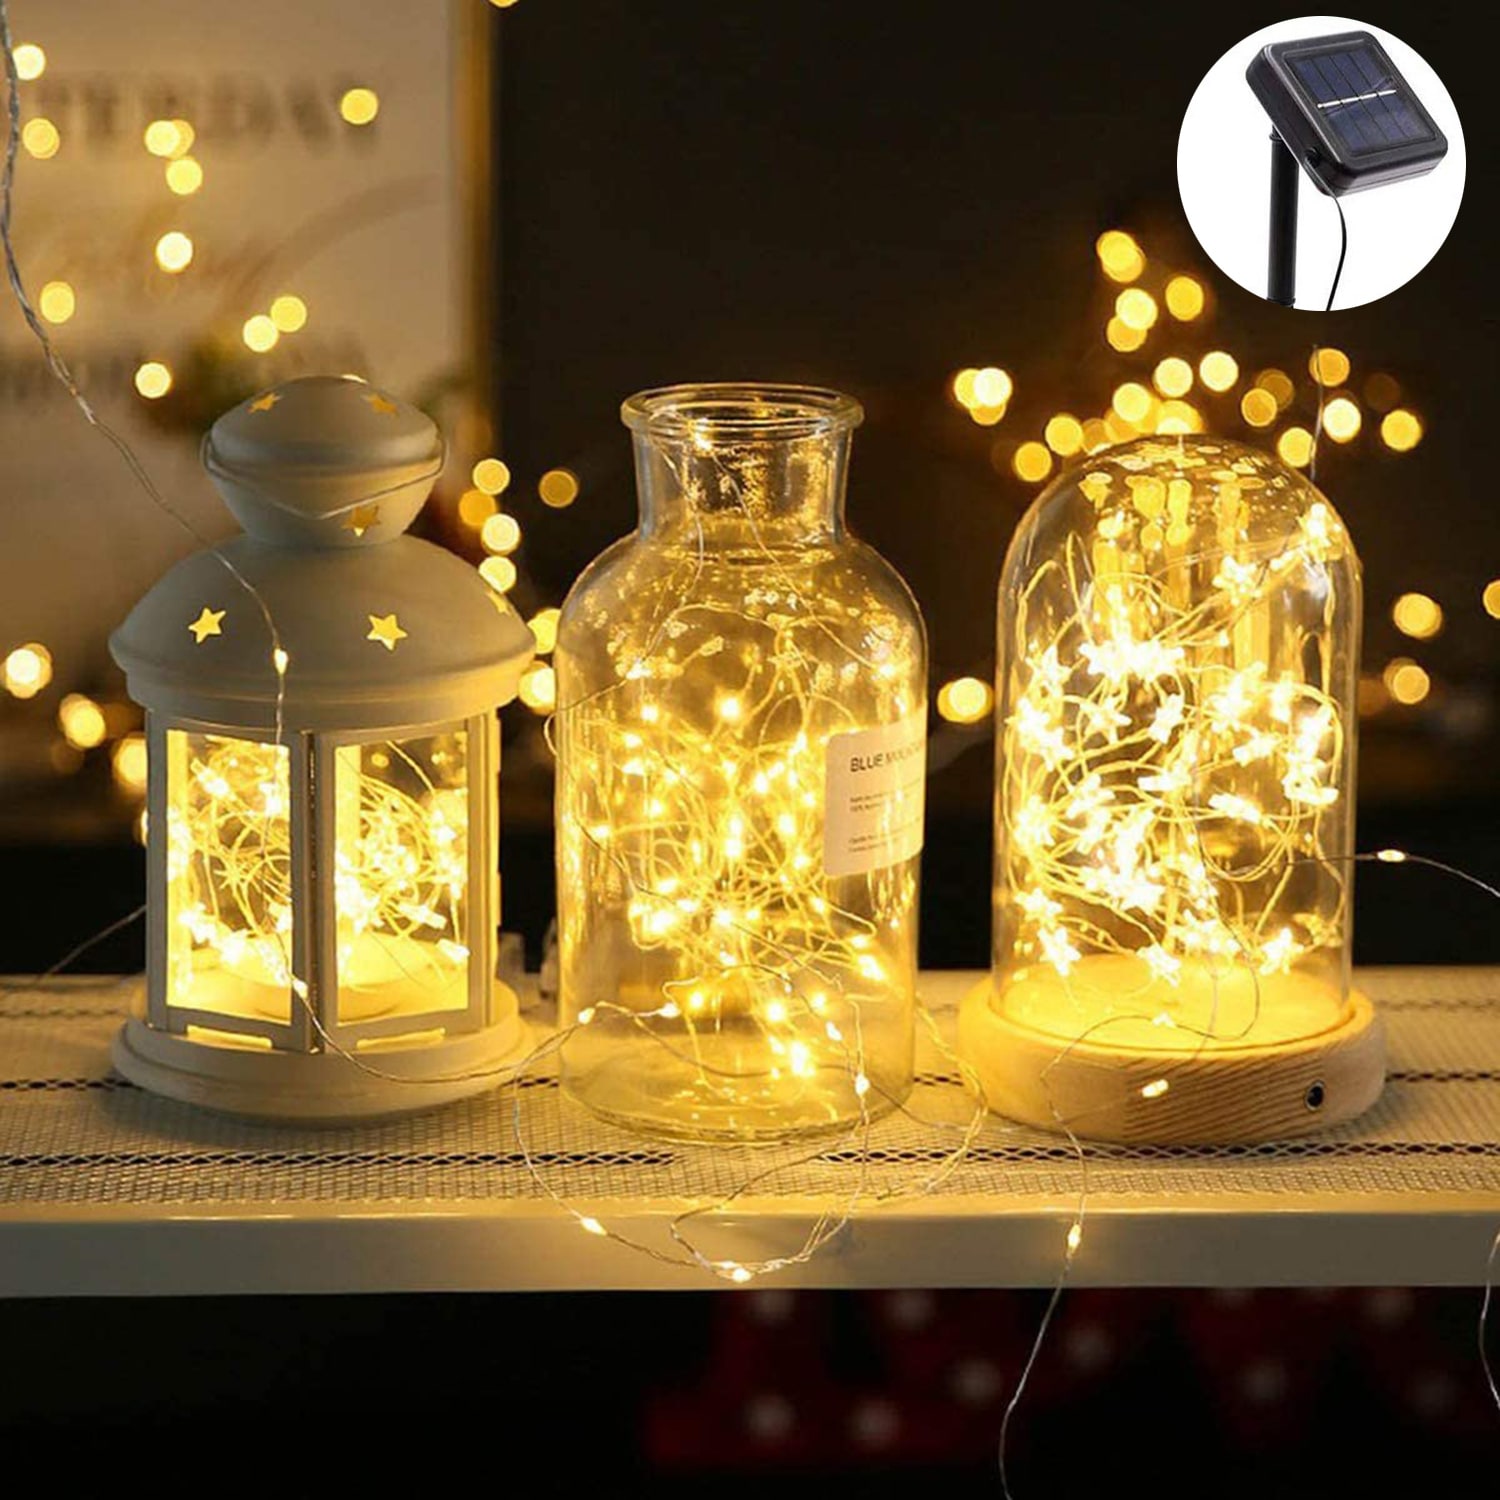 2 Indoor/Outdoor Solar Glass Jar Luminary Lamp w 7-Color Changing LED Light 